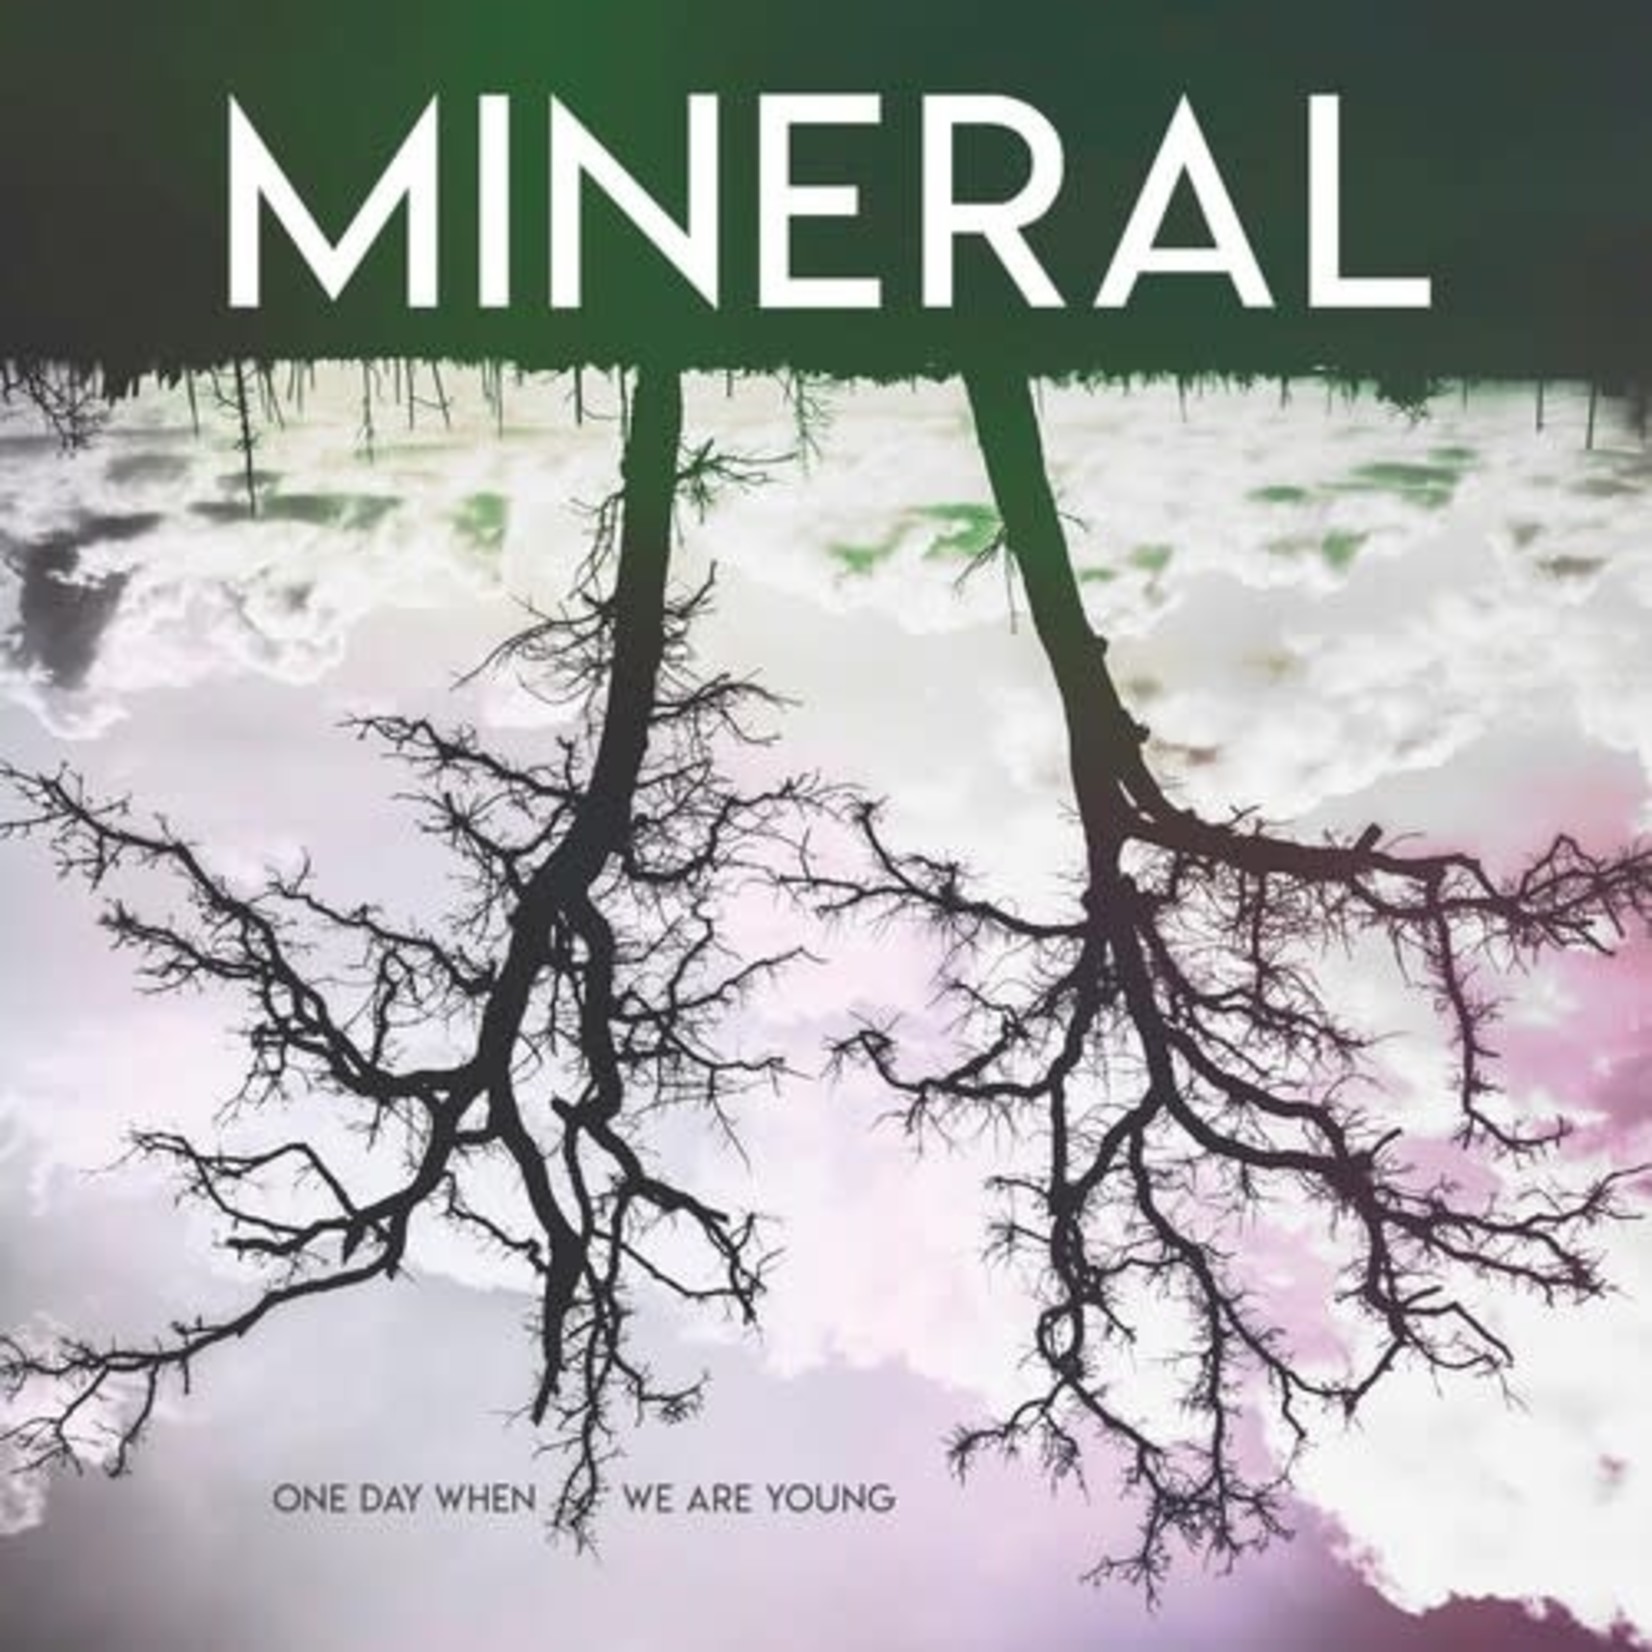 House Arrest Mineral - One Day When We Are Young: Mineral At 25 (Book+10")